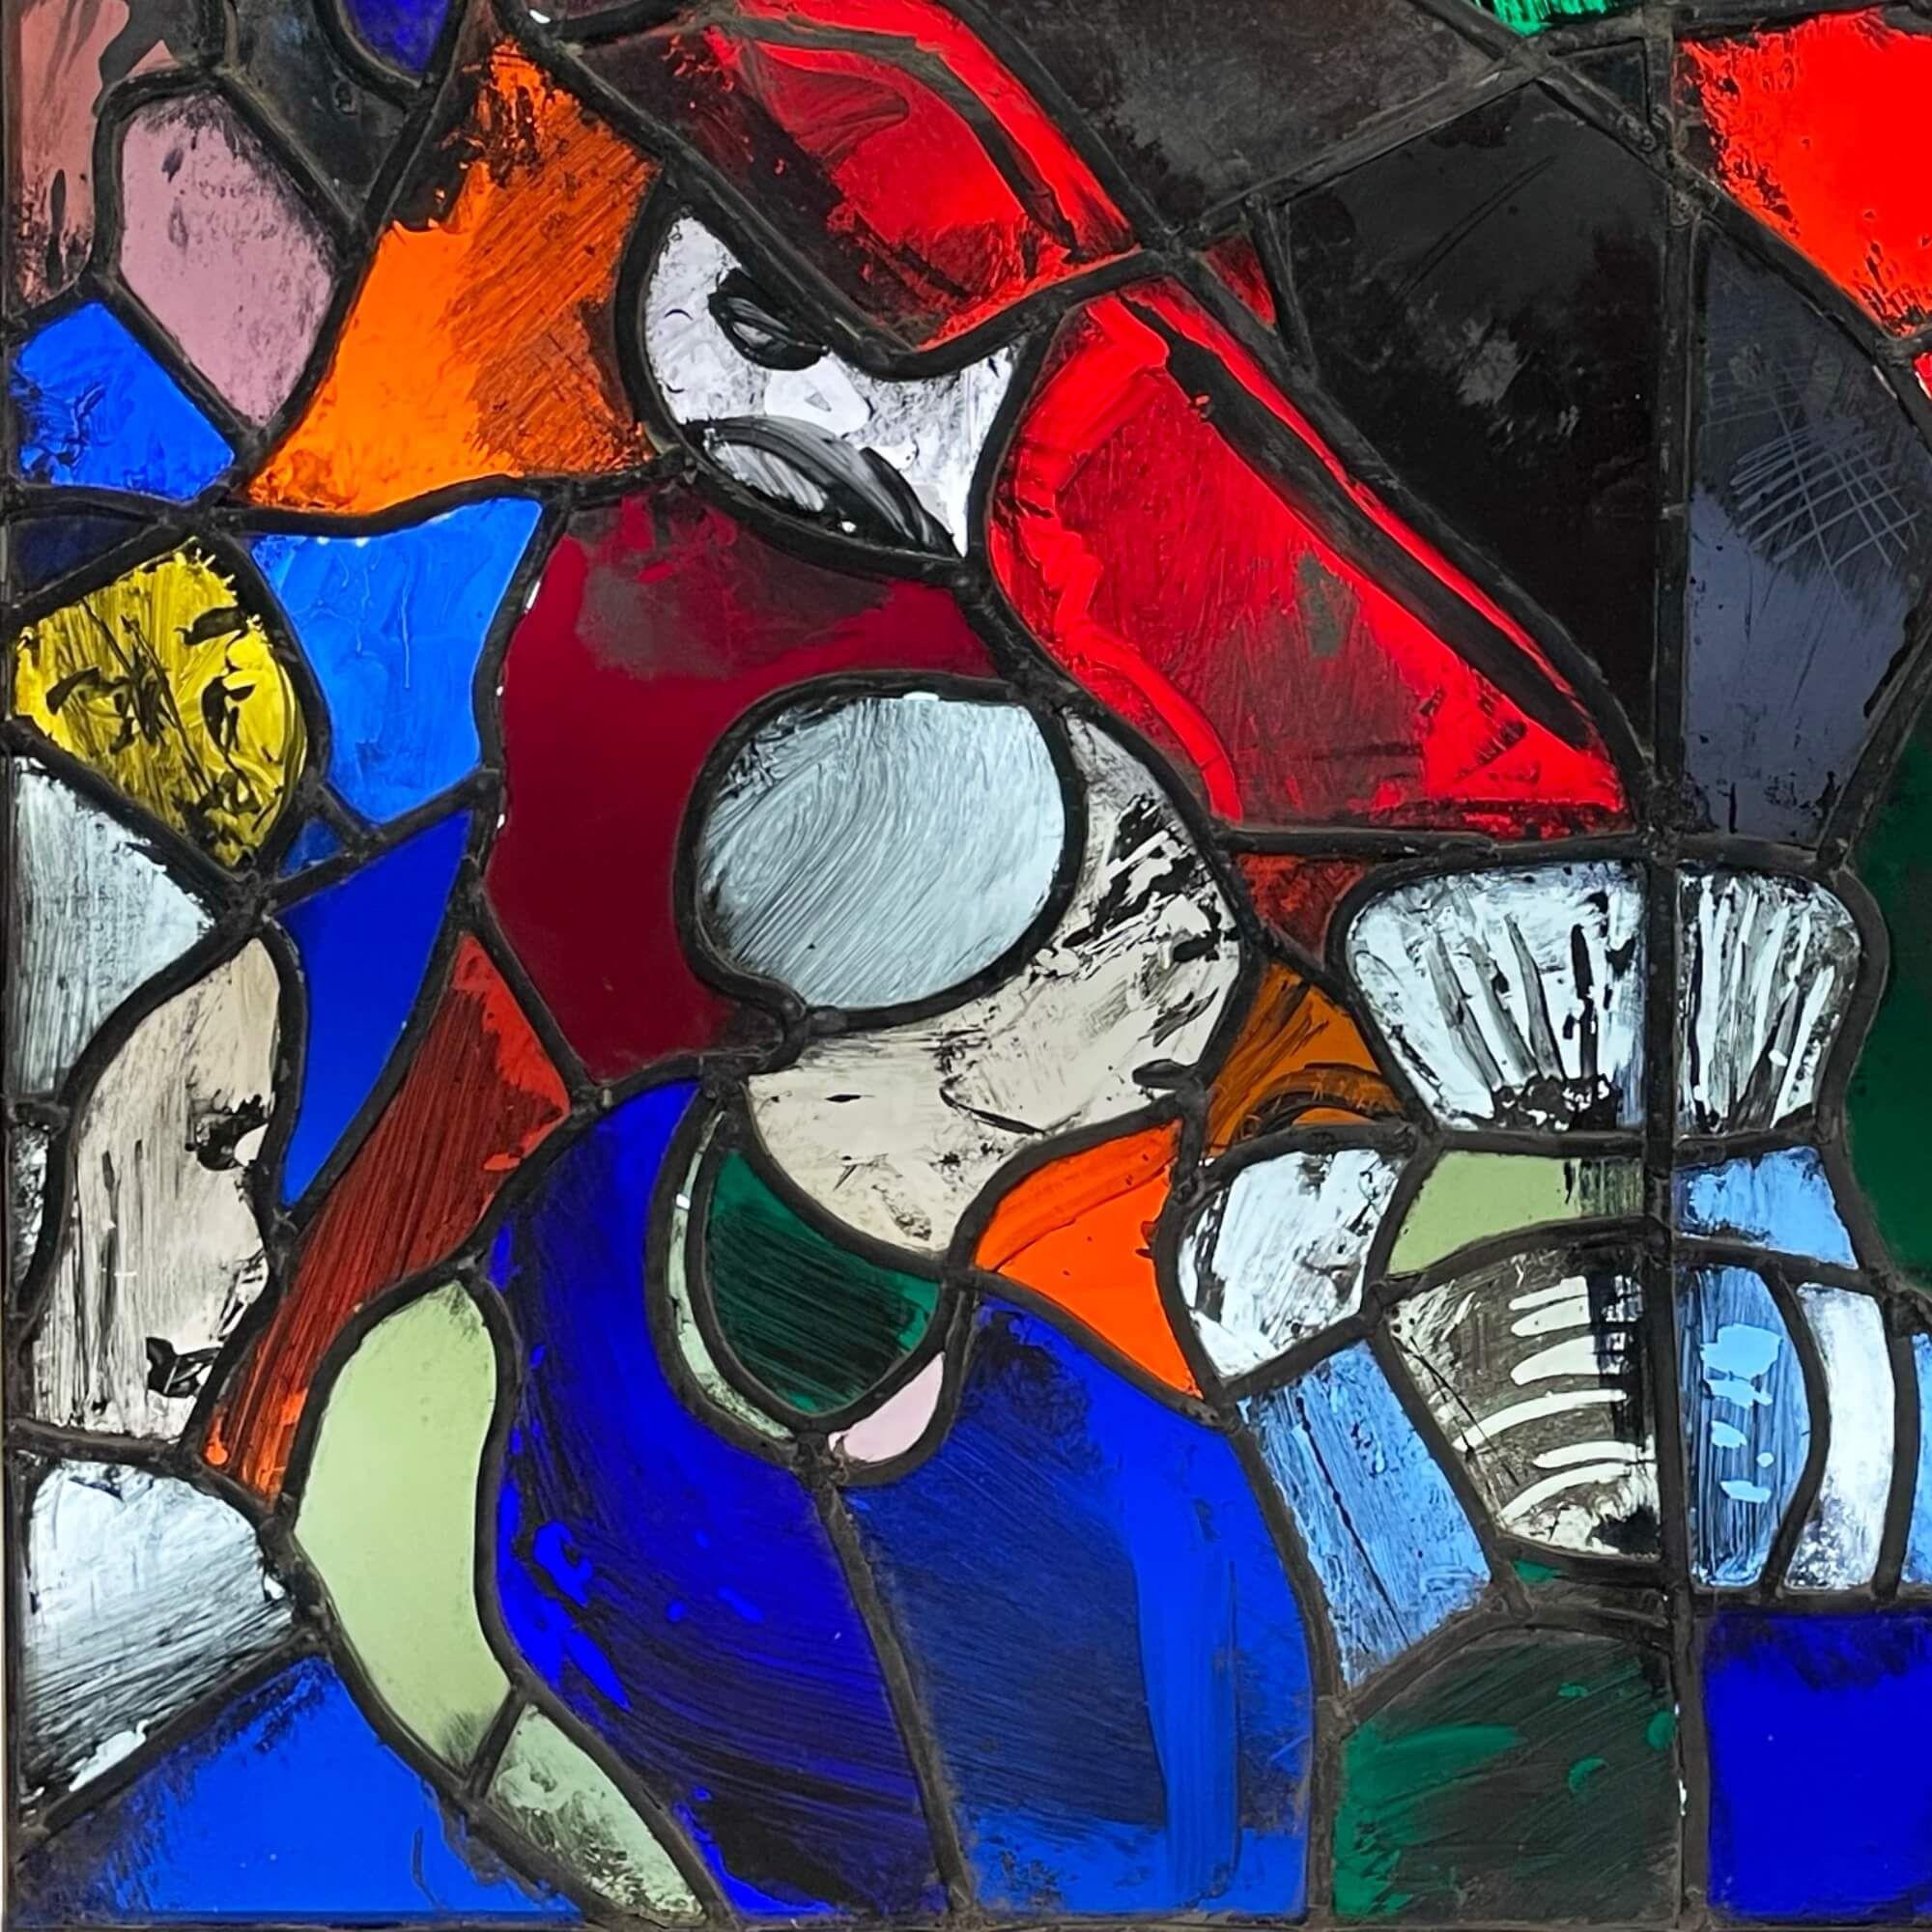 An abstract stained glass window from the studio of Patrick Reyntiens (1925-2021). Attributed to the artist, this stained glass panel depicts a colourful design with abstract hand painted details and irregular forms. It is one of various stained